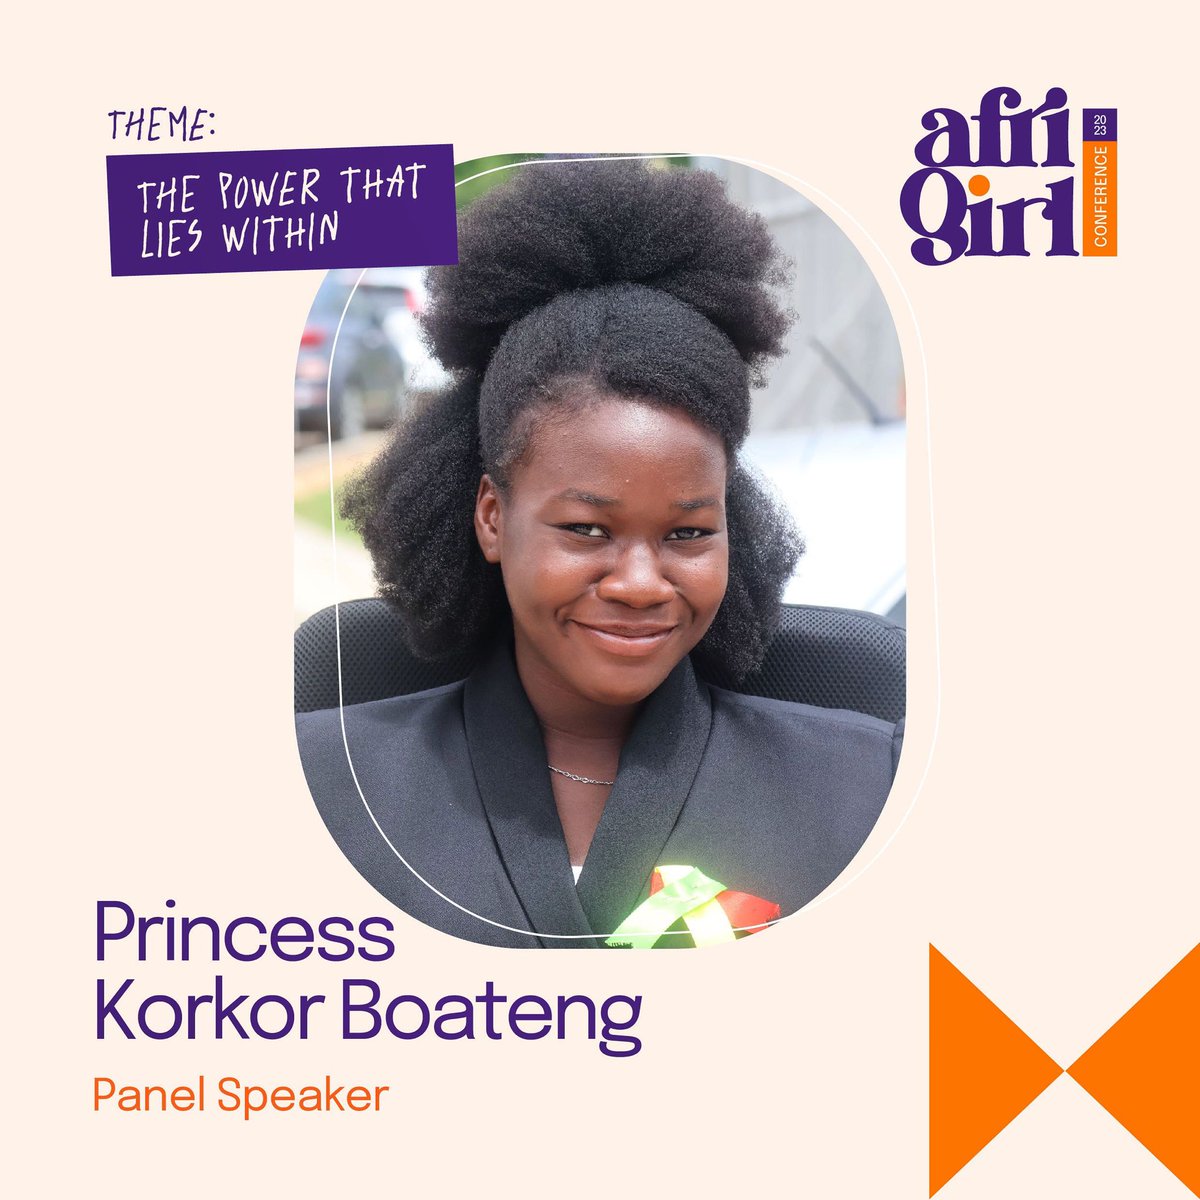 Princess Korkor Boateng, Ghana's Youngest Chartered Accountant, joins the AfriGirl Conference as a panel speaker. We can't wait to have her!
#panel #panelspeaker #speaker #afrigirlconference #afrigirlcon #ag2023